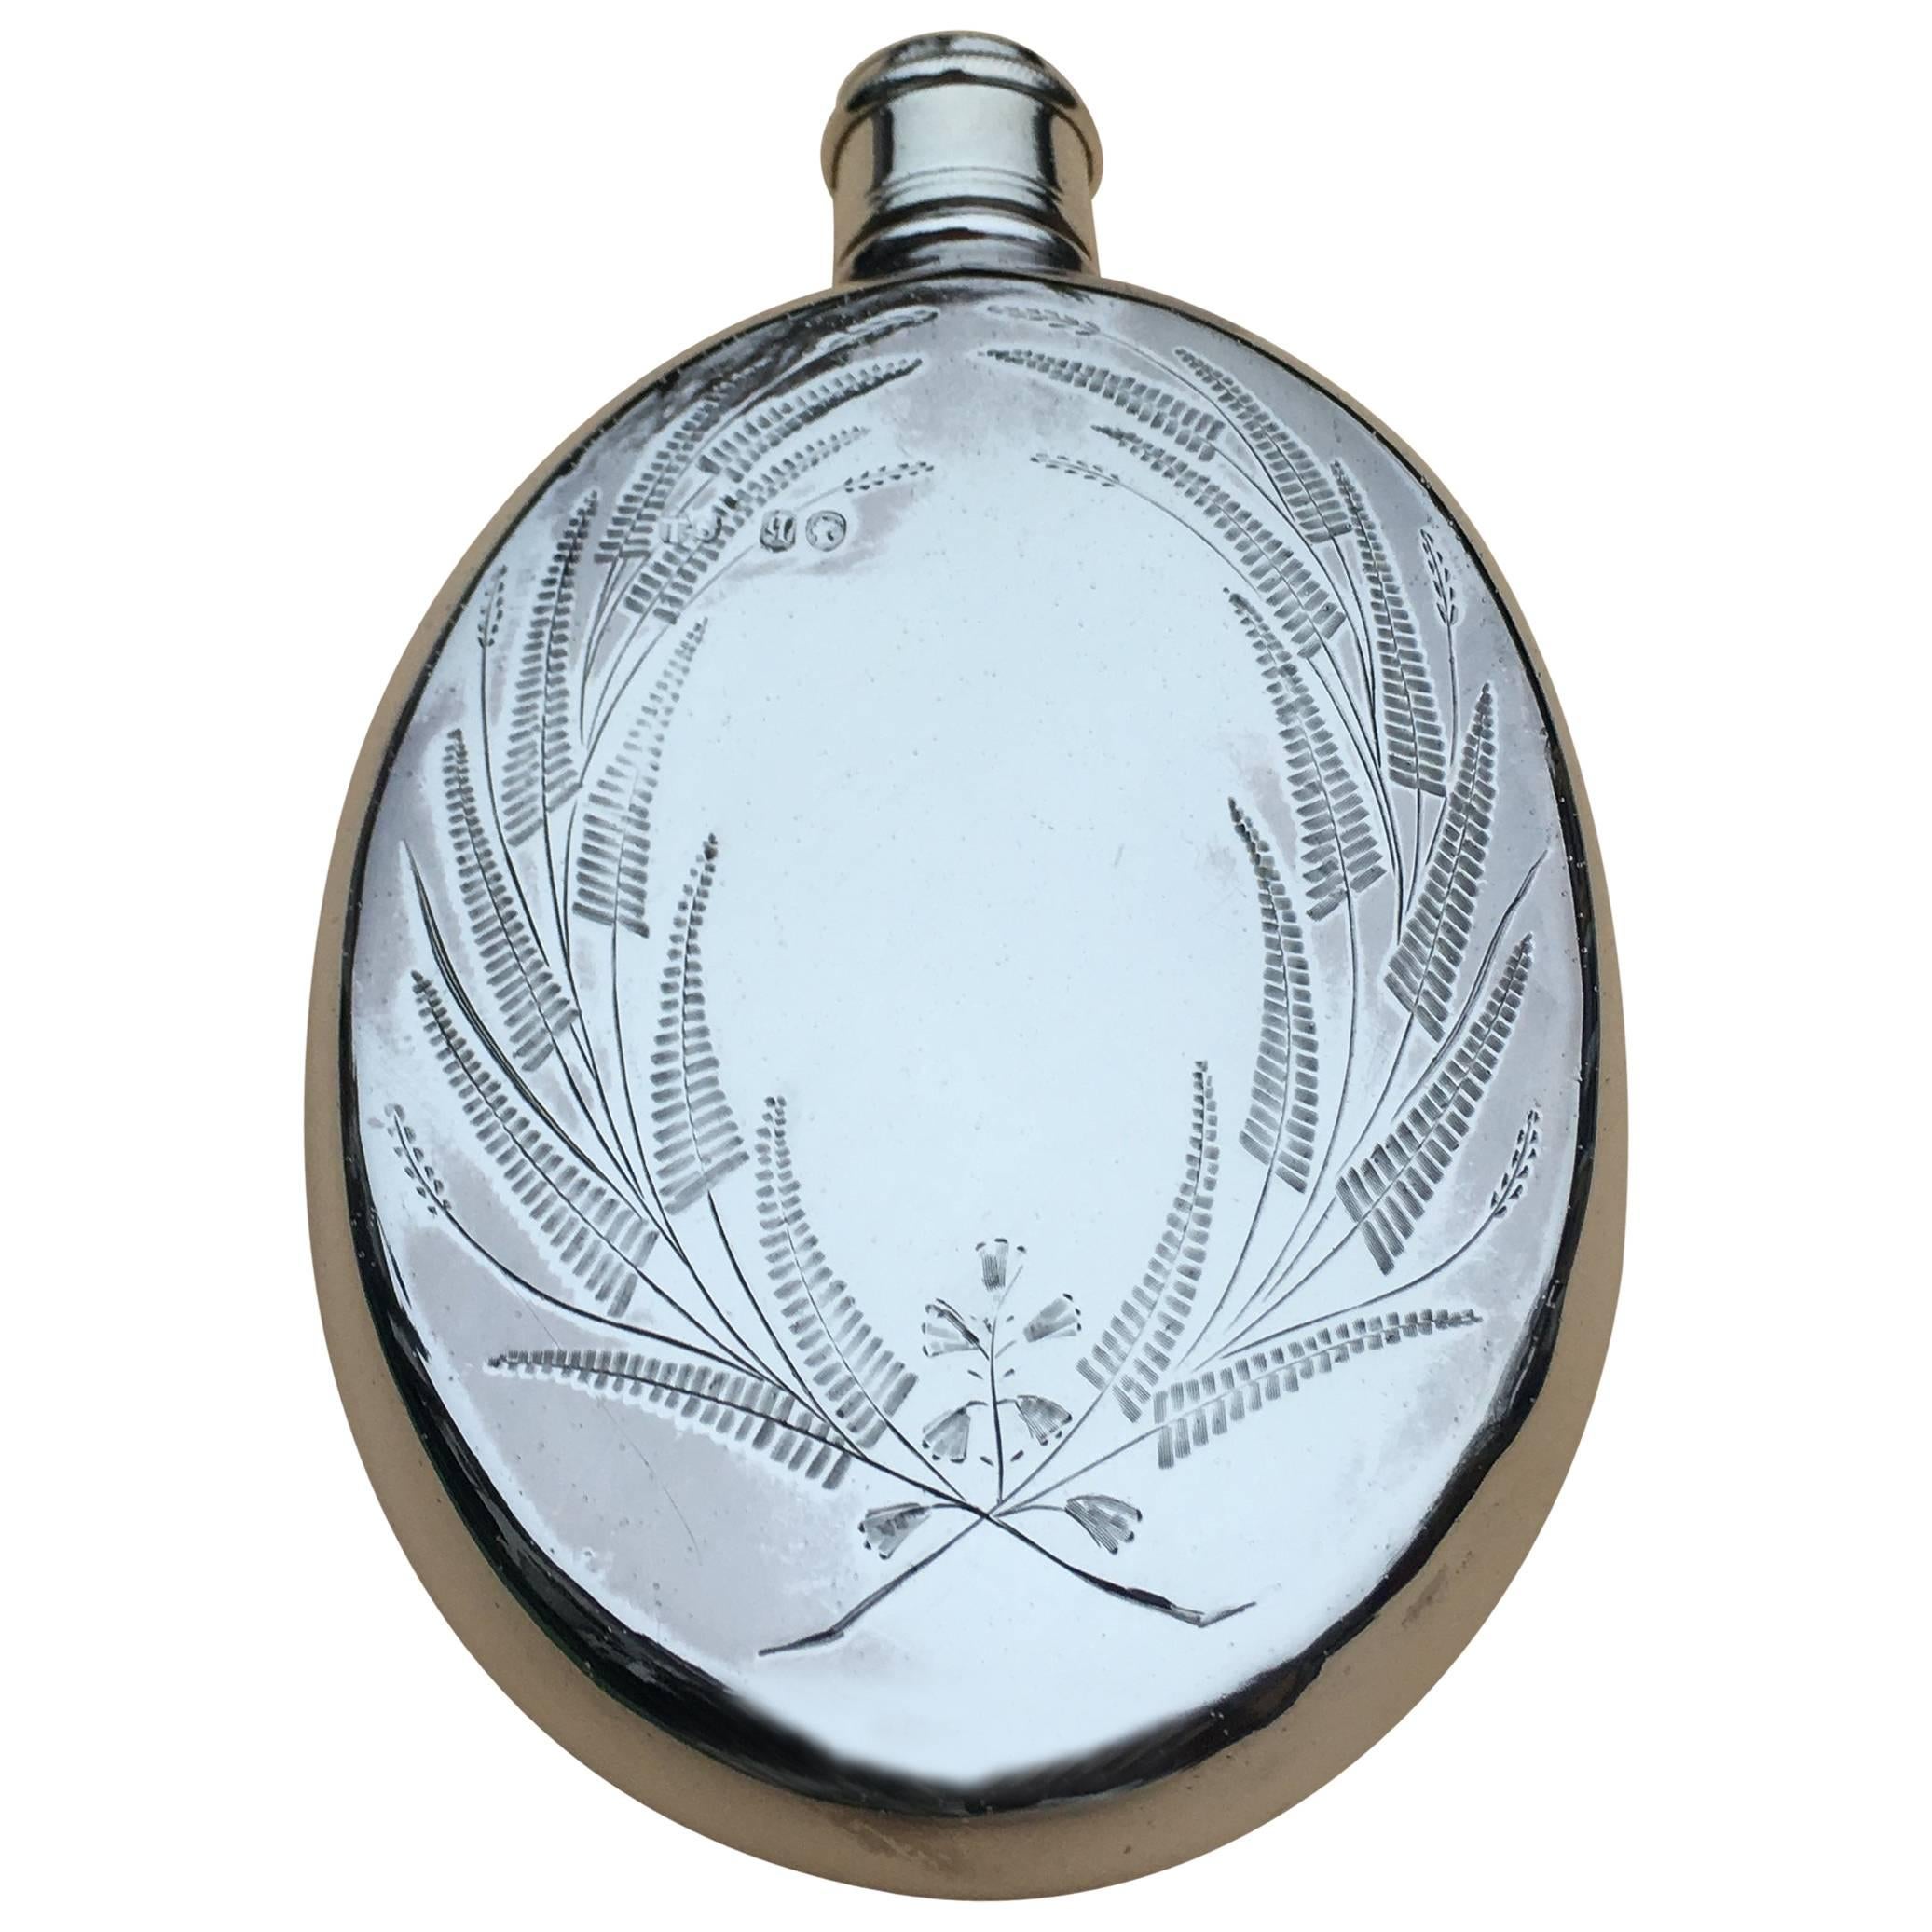 Arts and Crafts Aesthetic Movement Silver Hip or Pocket Flask, 1871